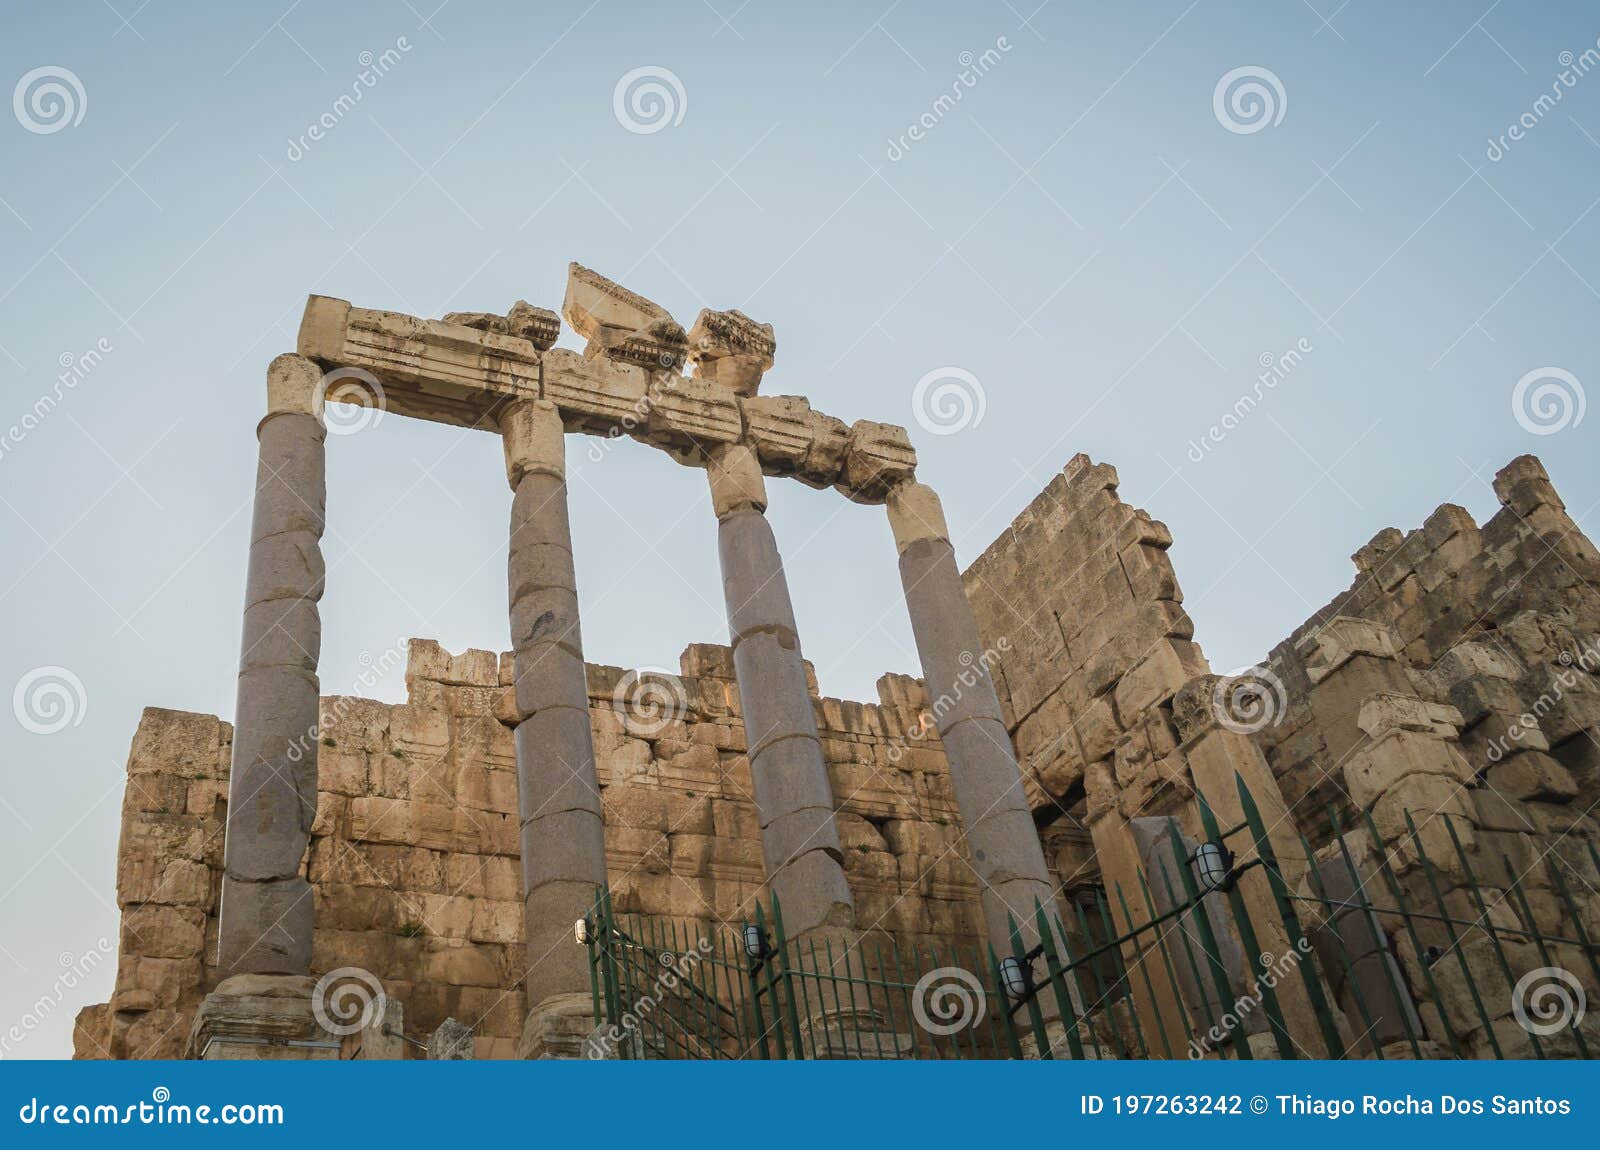 ruins of baalbek. ancient city of phenicia located in the beca valley in lebanon. acropolis with roman remains